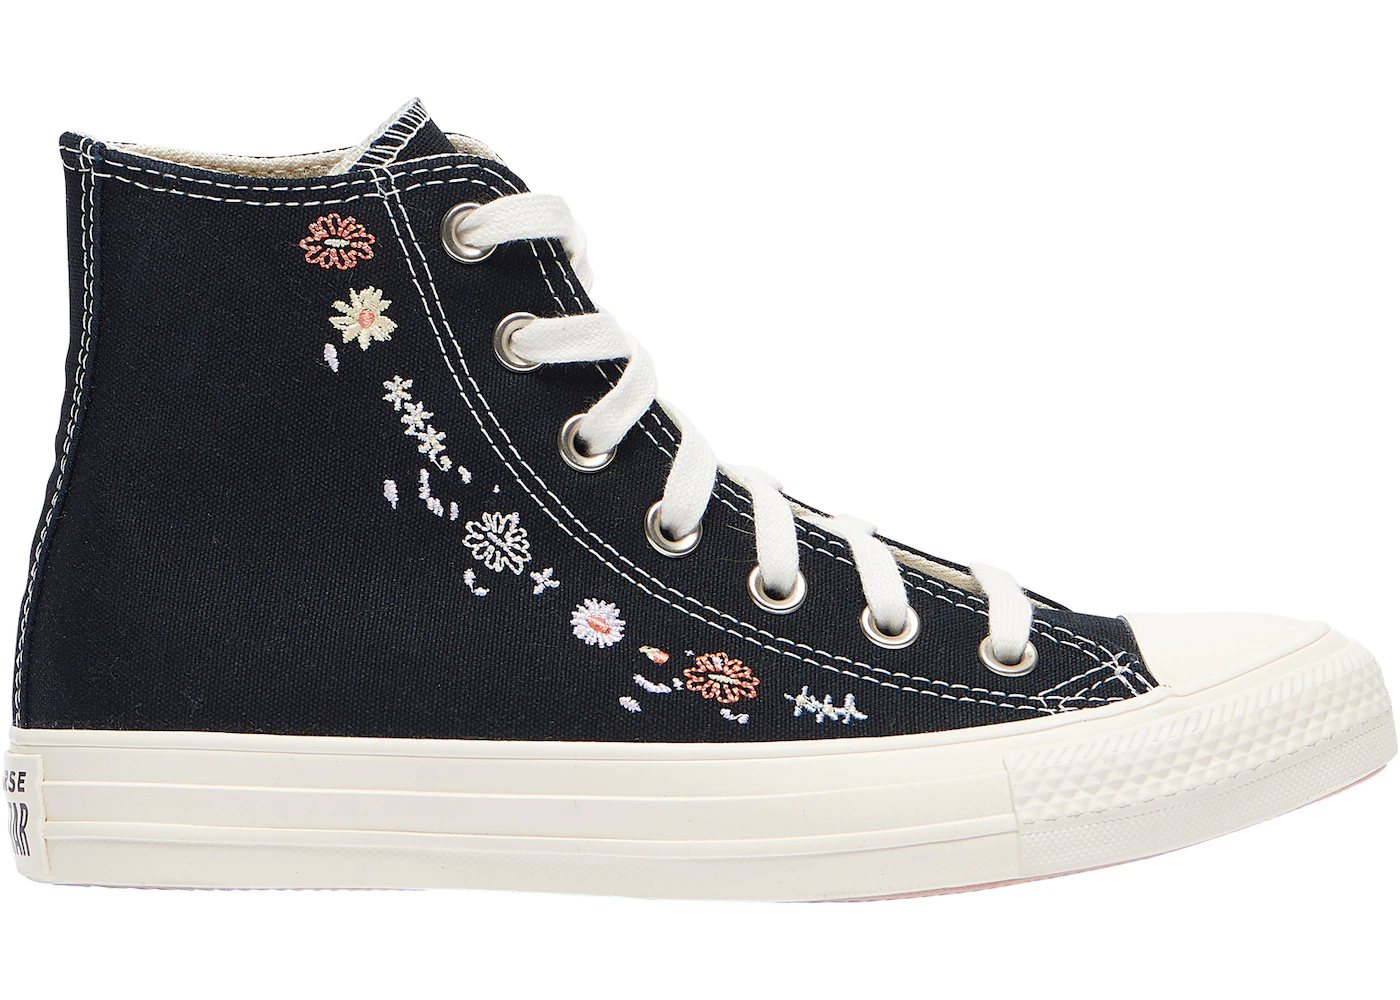 Settle reptiles Il Converse Chuck Taylor All-Star Hi Embroidered Floral (W) - A01585C - US